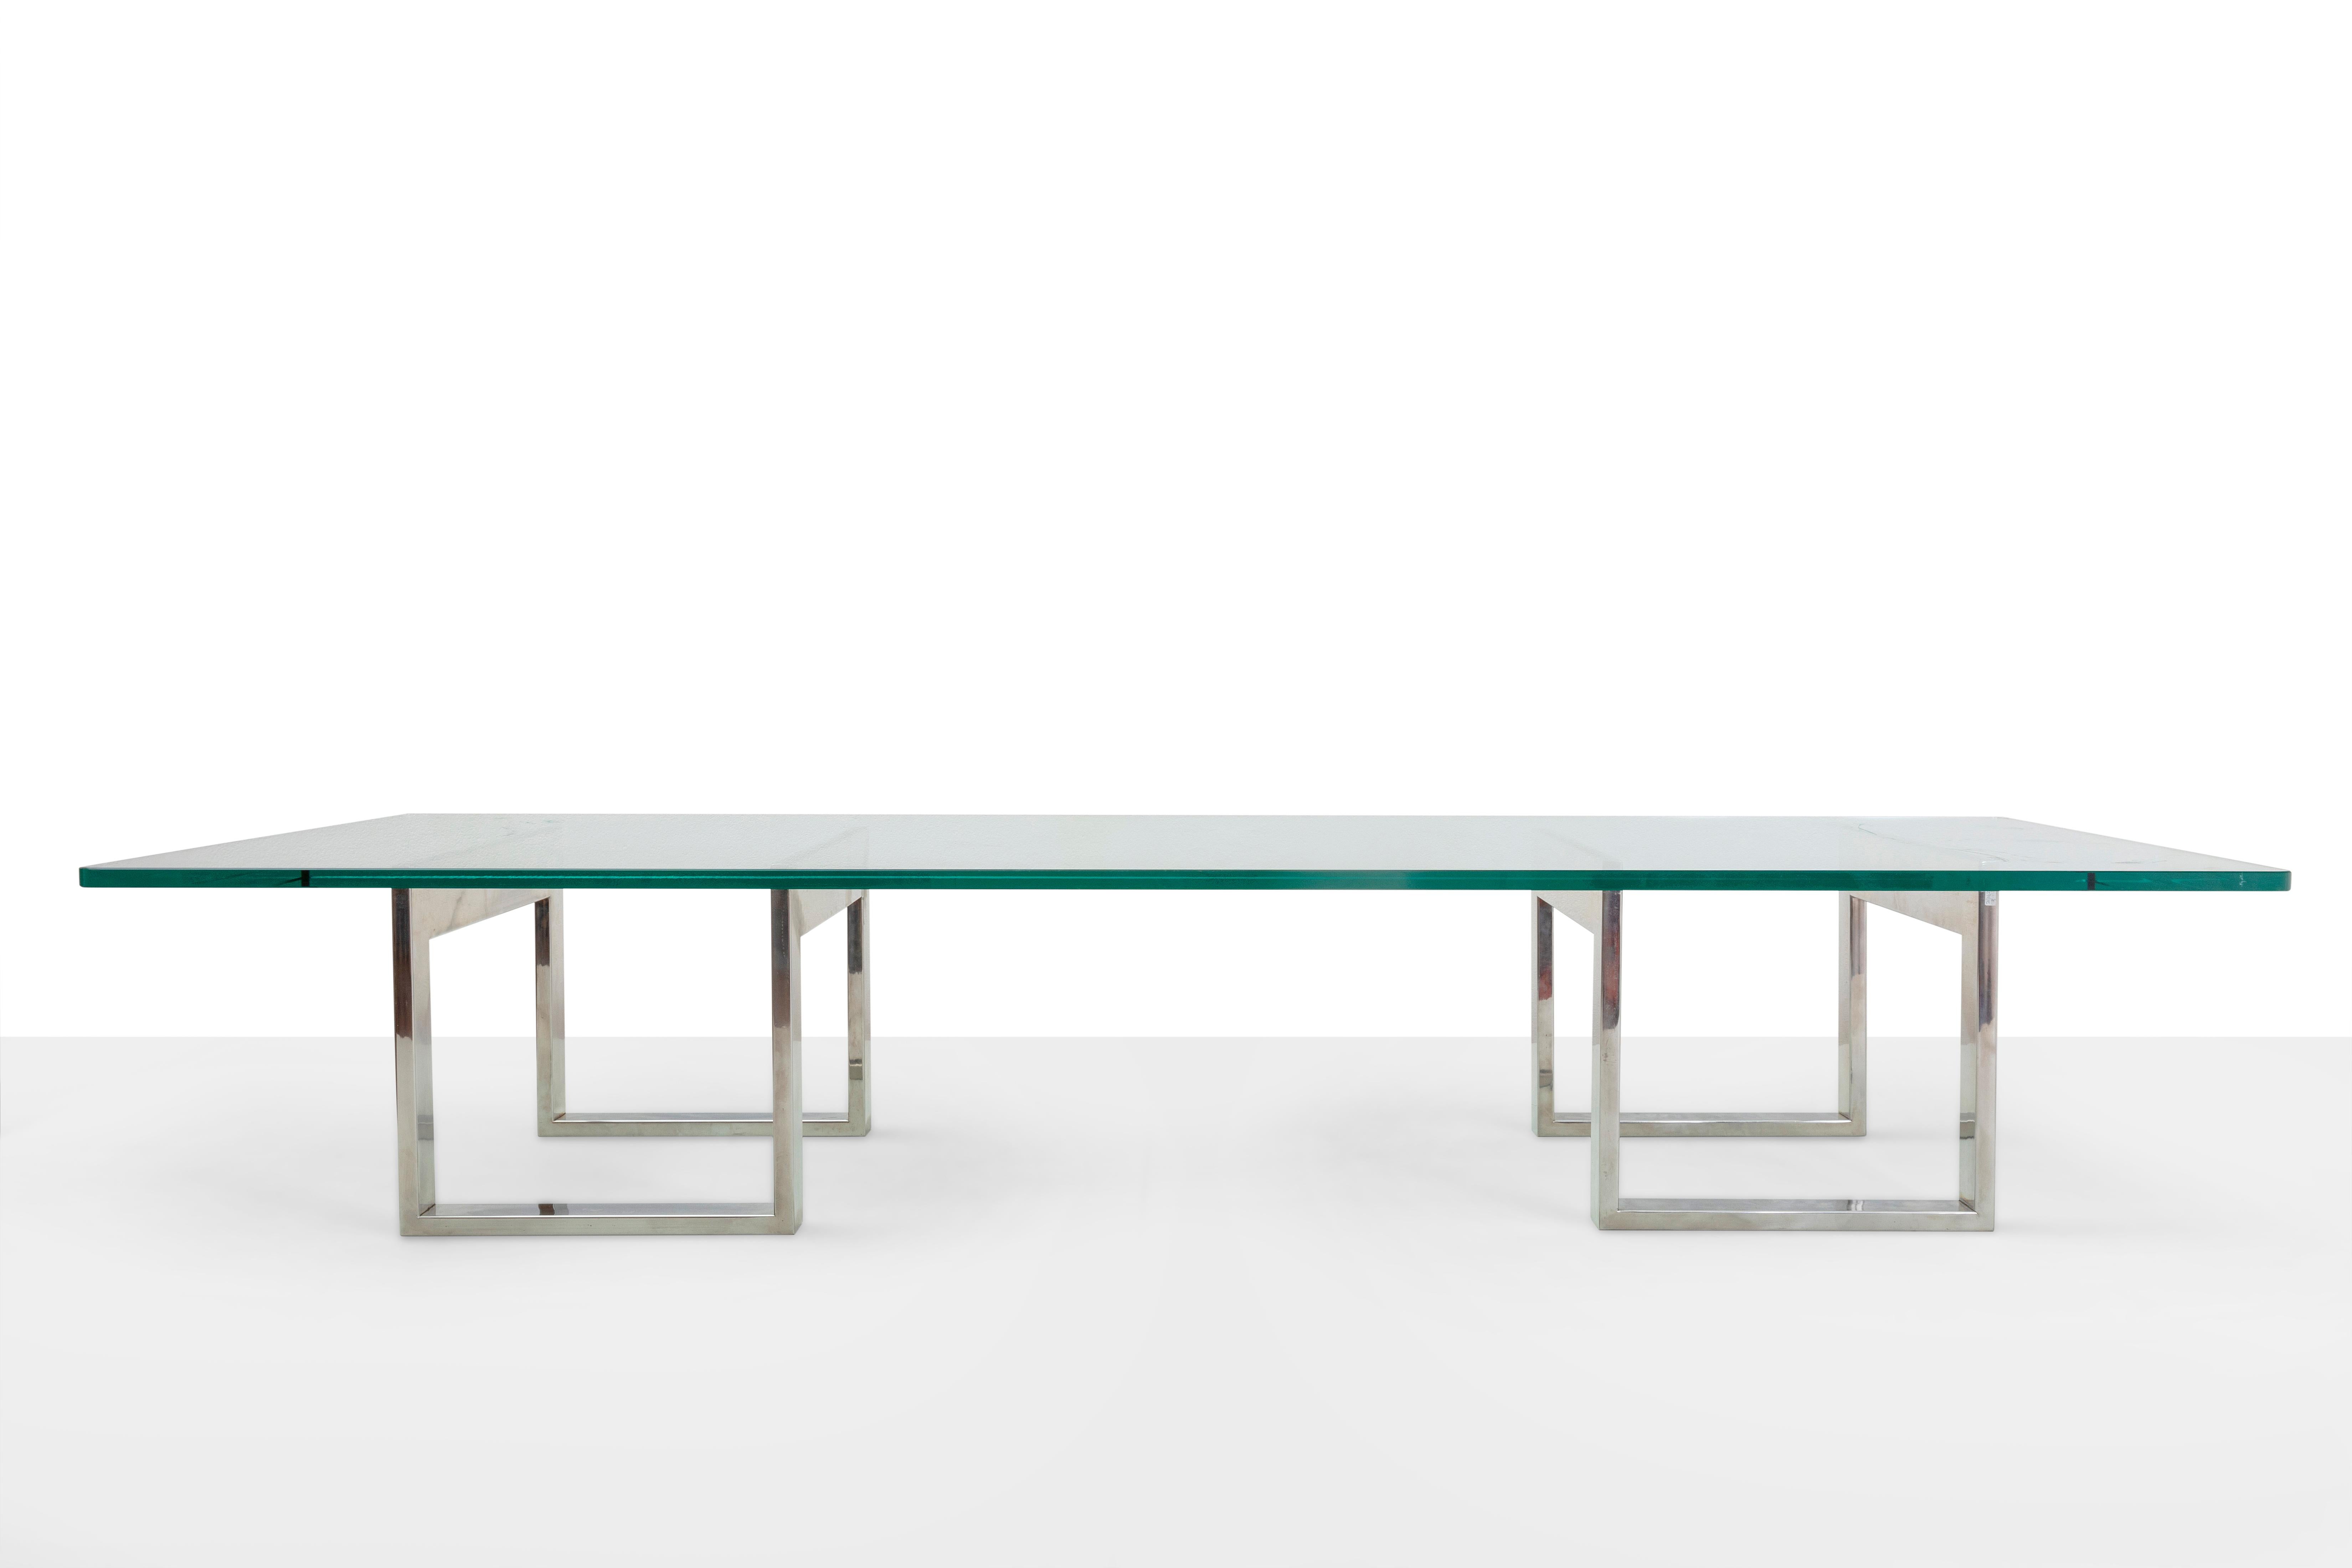 Romeo Rega Prod. Italy, c. 1970. Low table with beveled glass top and two chrome-plated steel bases. Cm glass 198x96 2 bases cm H 34 L 37,5
the attribution has been proven by reference bibliographies, archive photos of similar furniture.

Born in